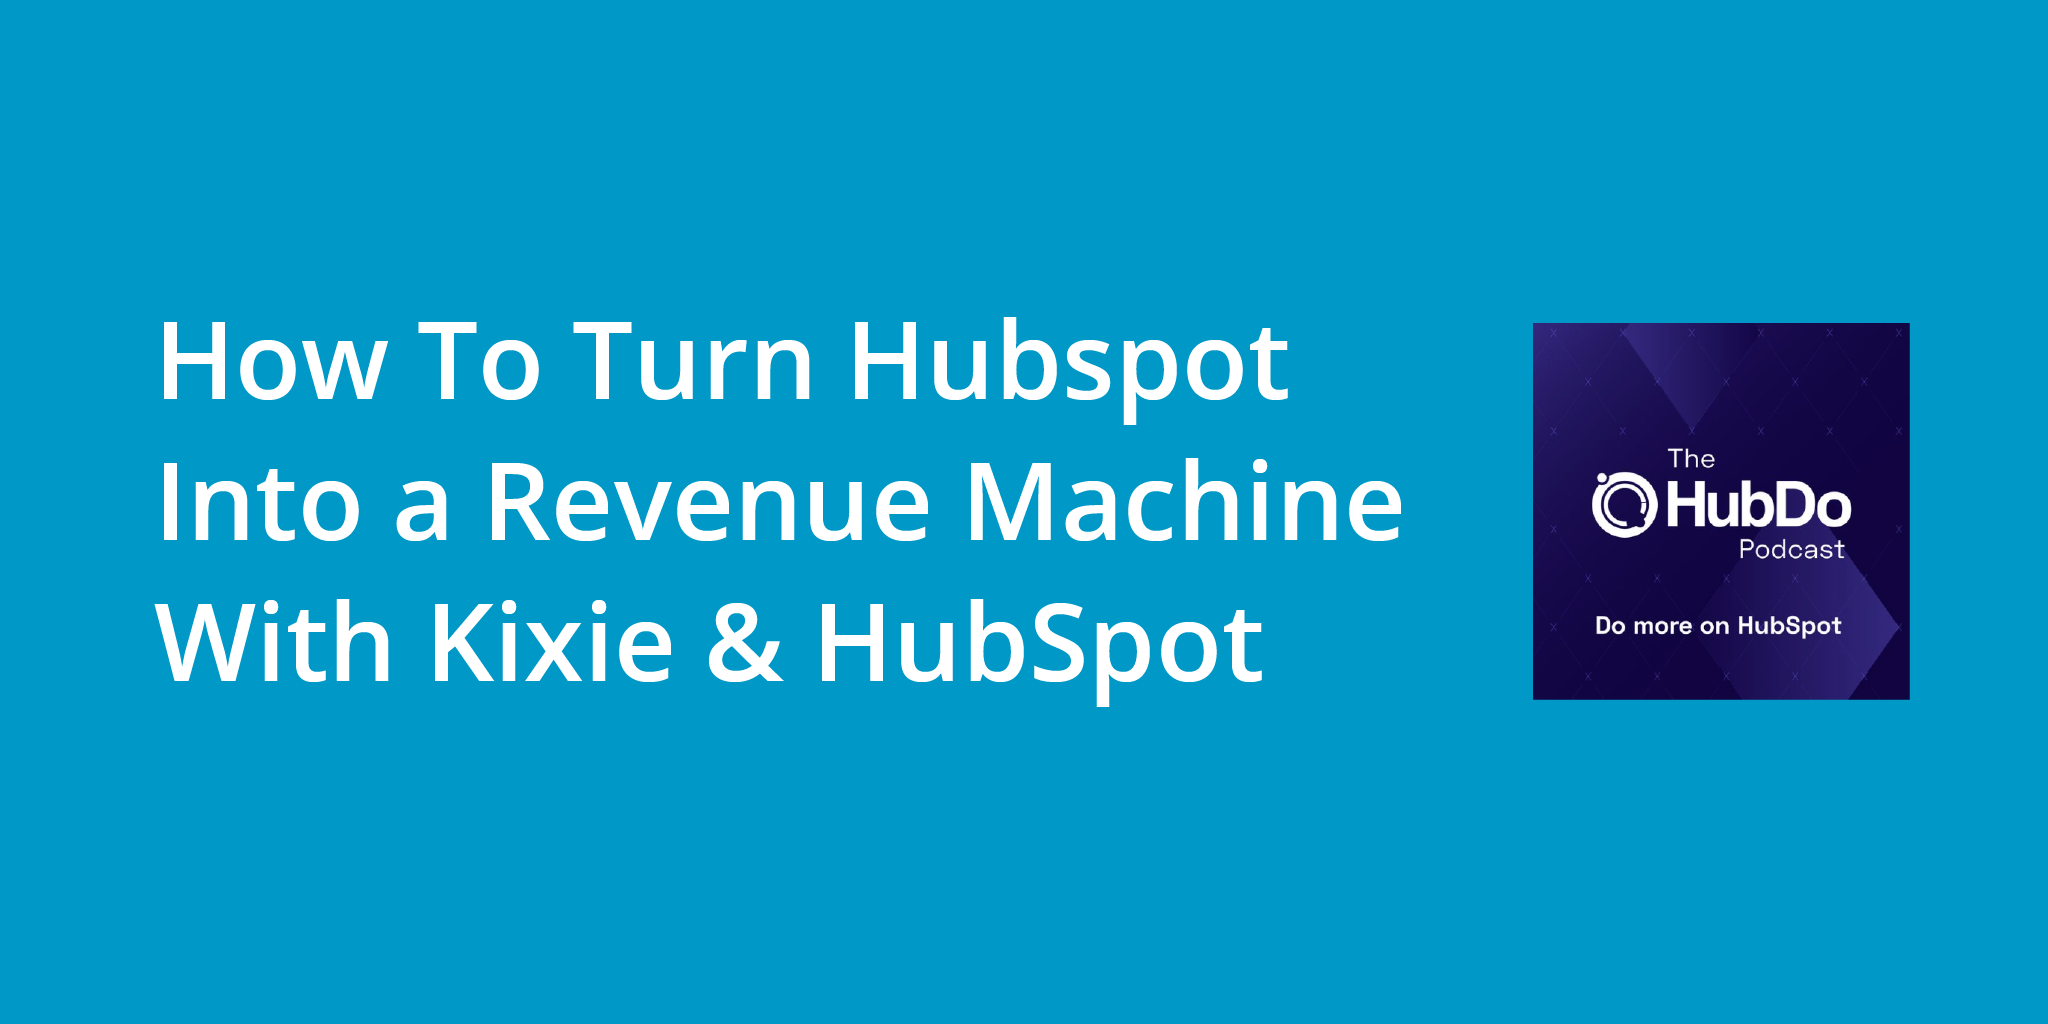 How To Turn Hubspot Into a Revenue Machine With Kixie & HubSpot